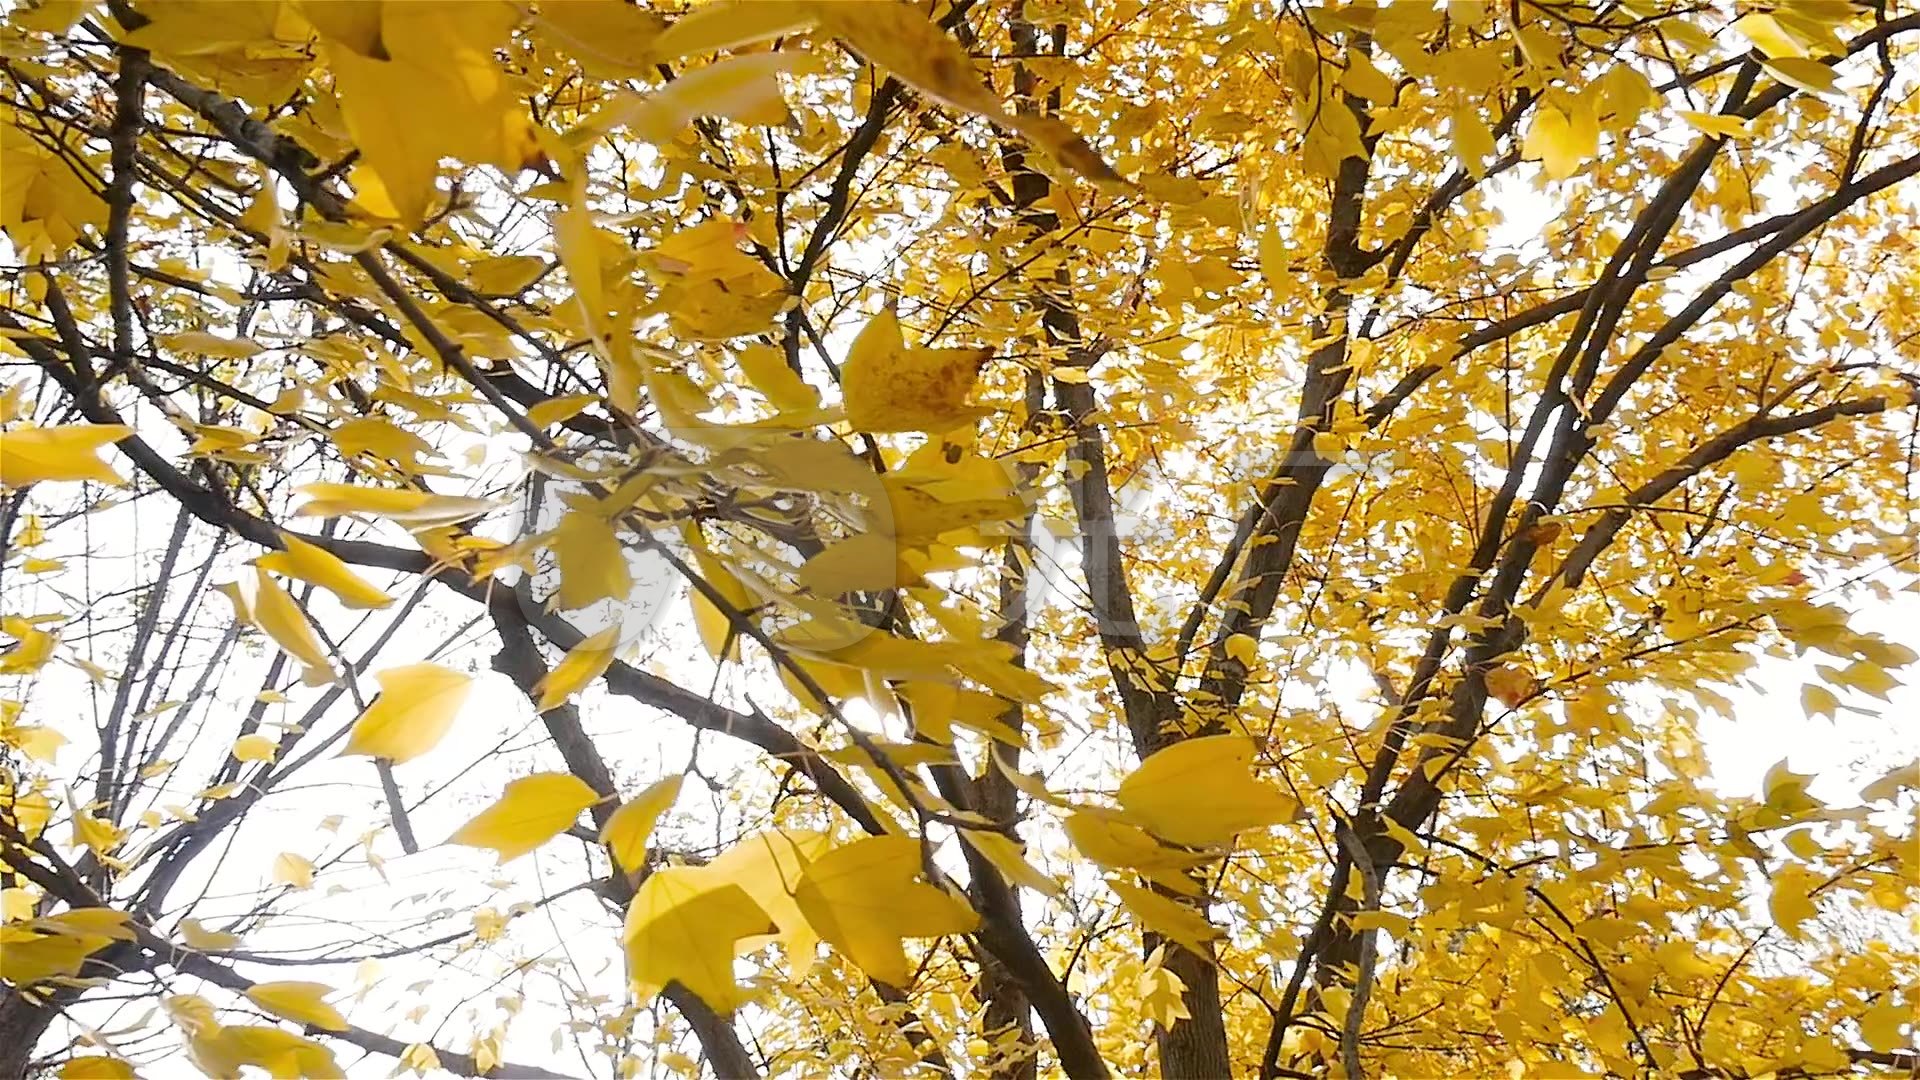 Free Images : tree, nature, branch, structure, sunlight, flower, autumn, brown, botany, yellow ...